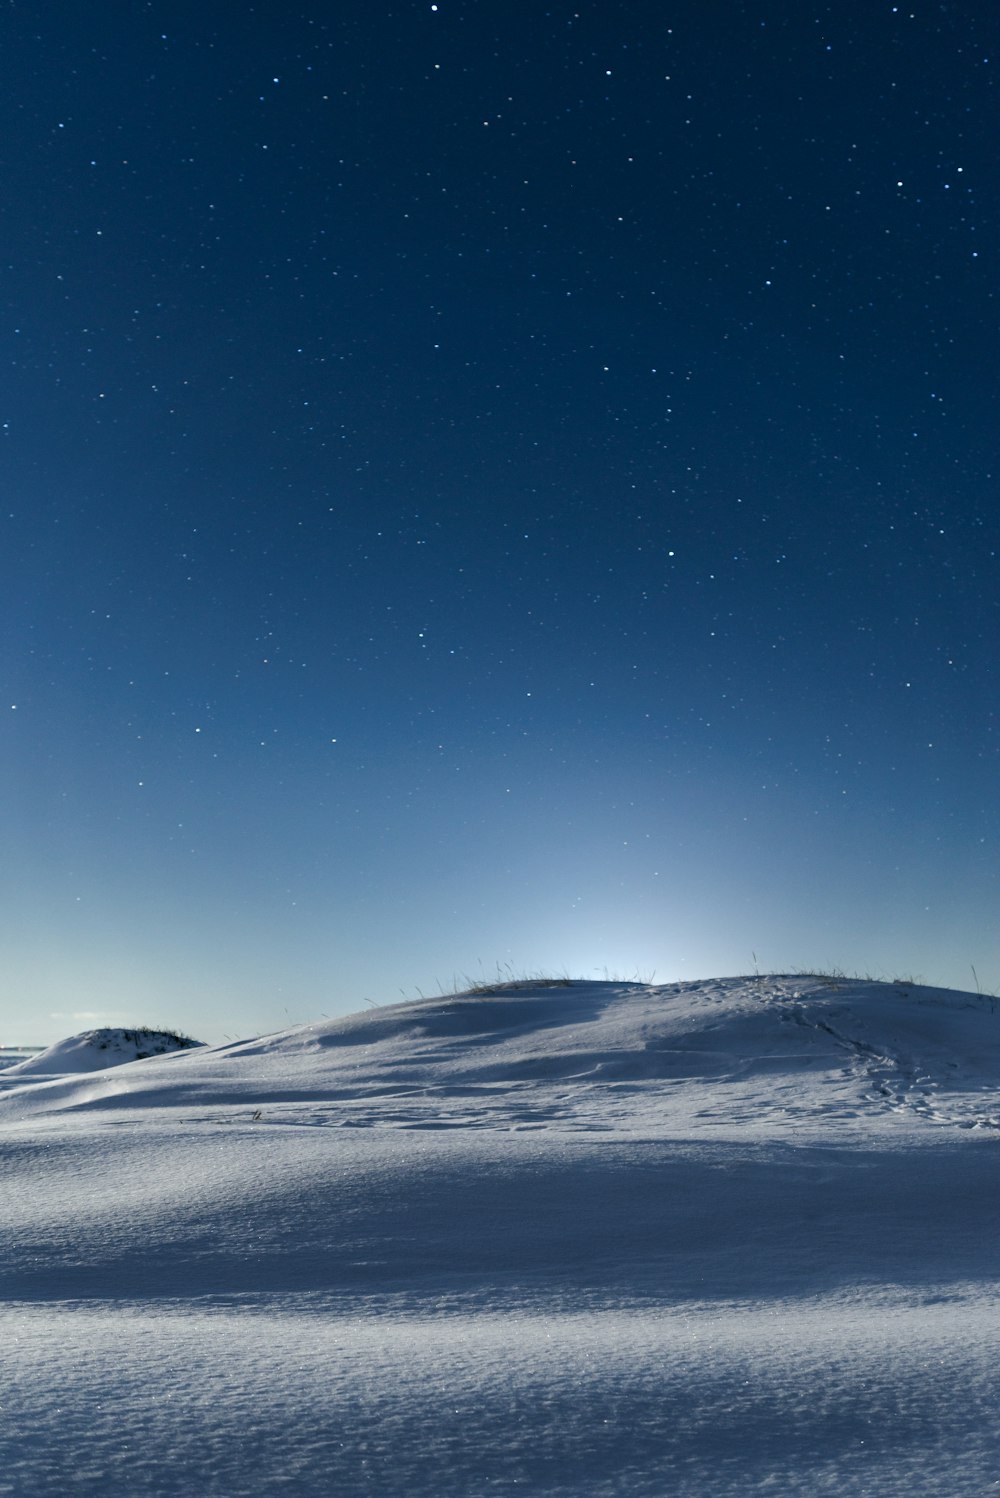 a snow covered hill under a blue sky with stars